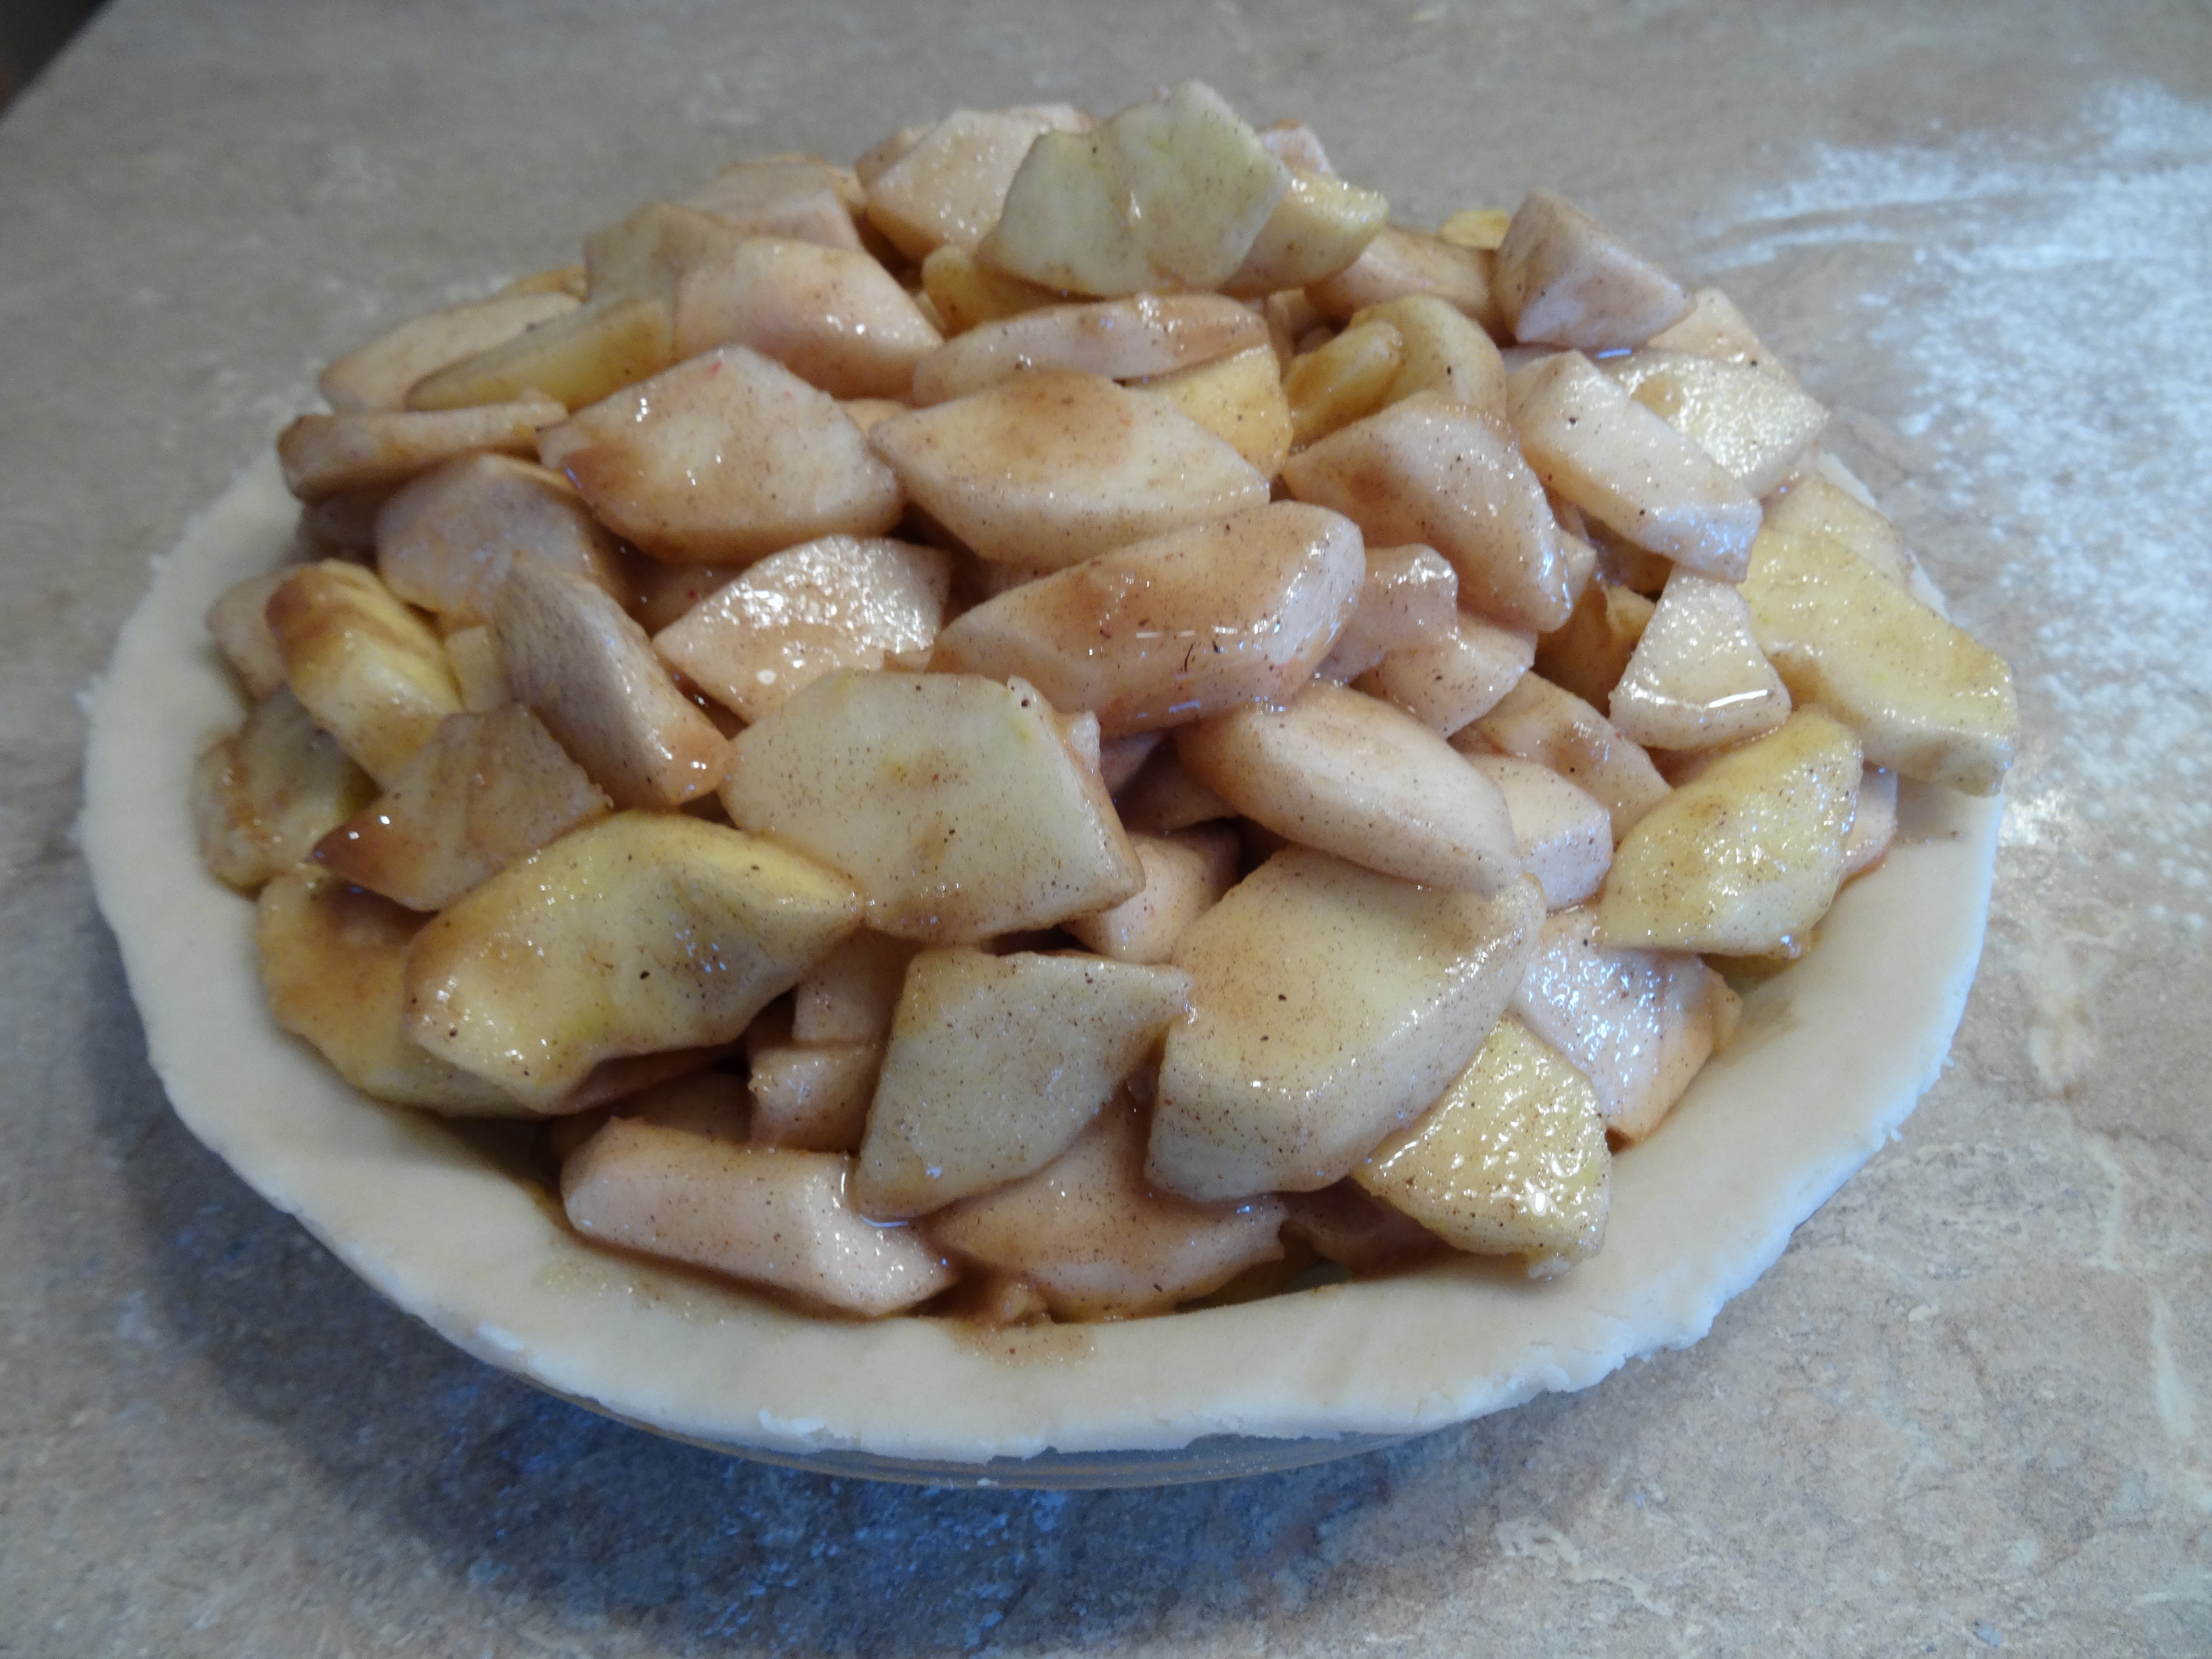 Apple Pie in the making